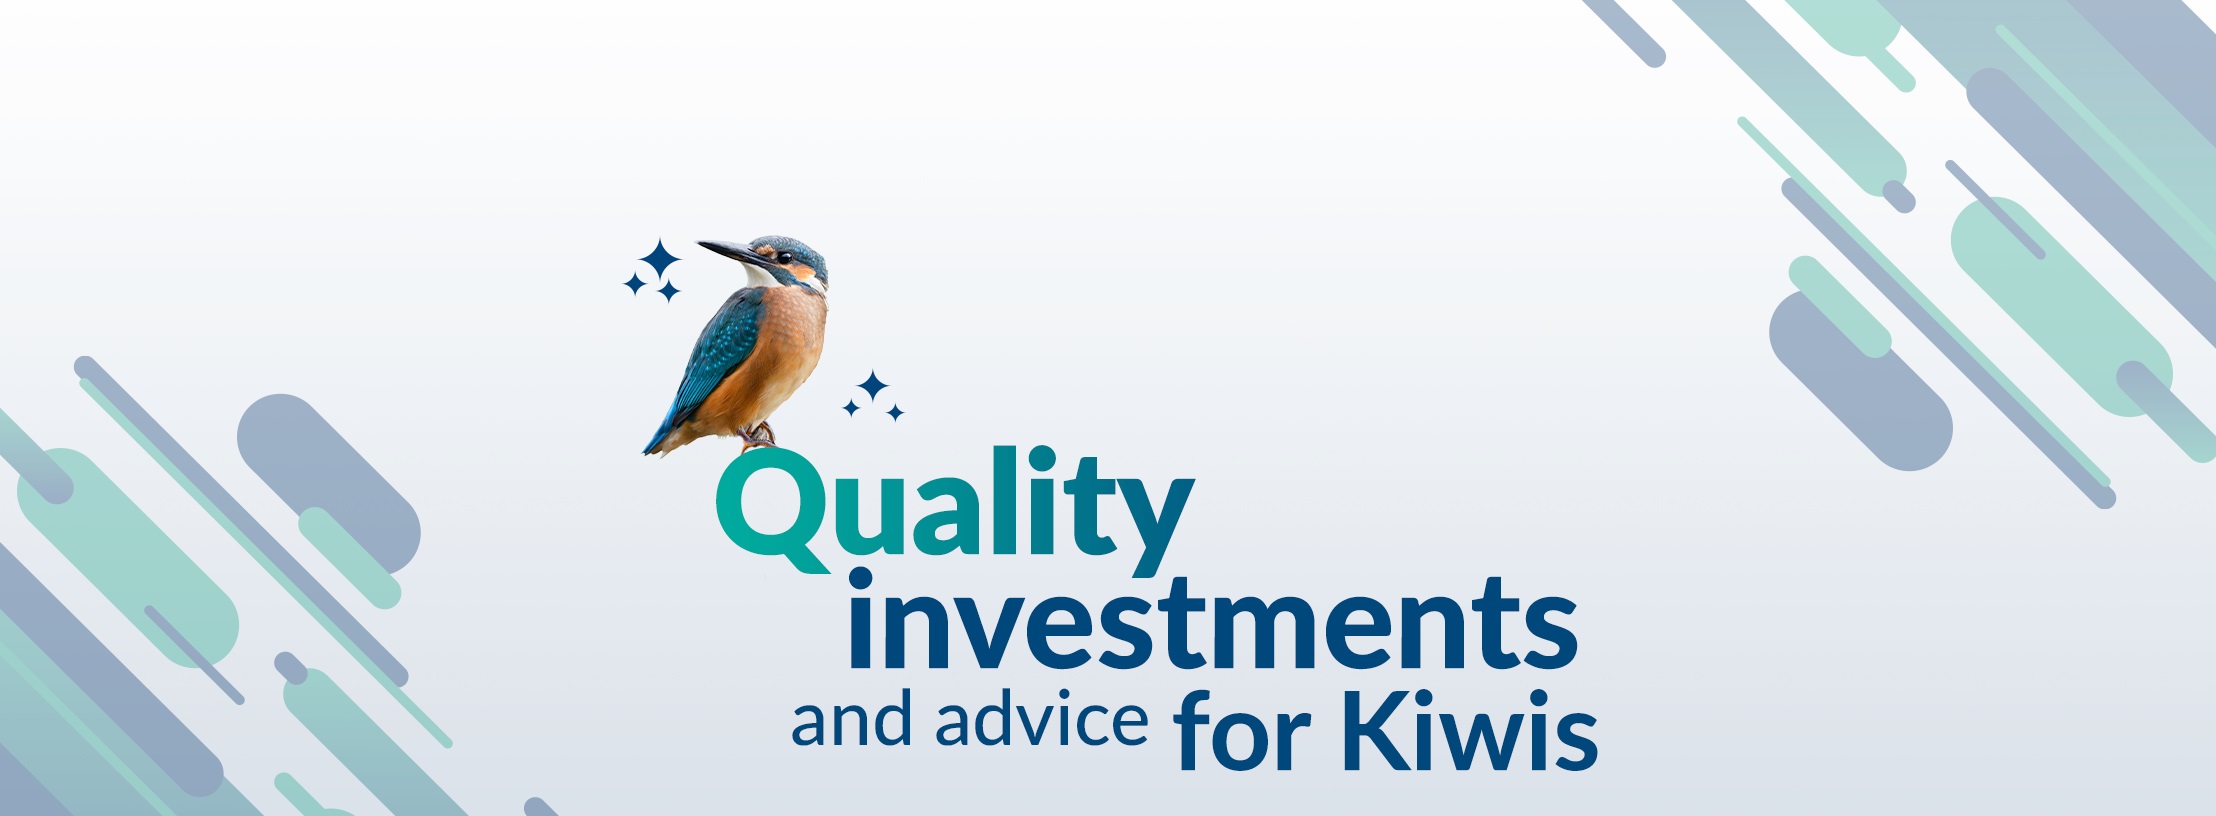 Quality investments and advice for Kiwis